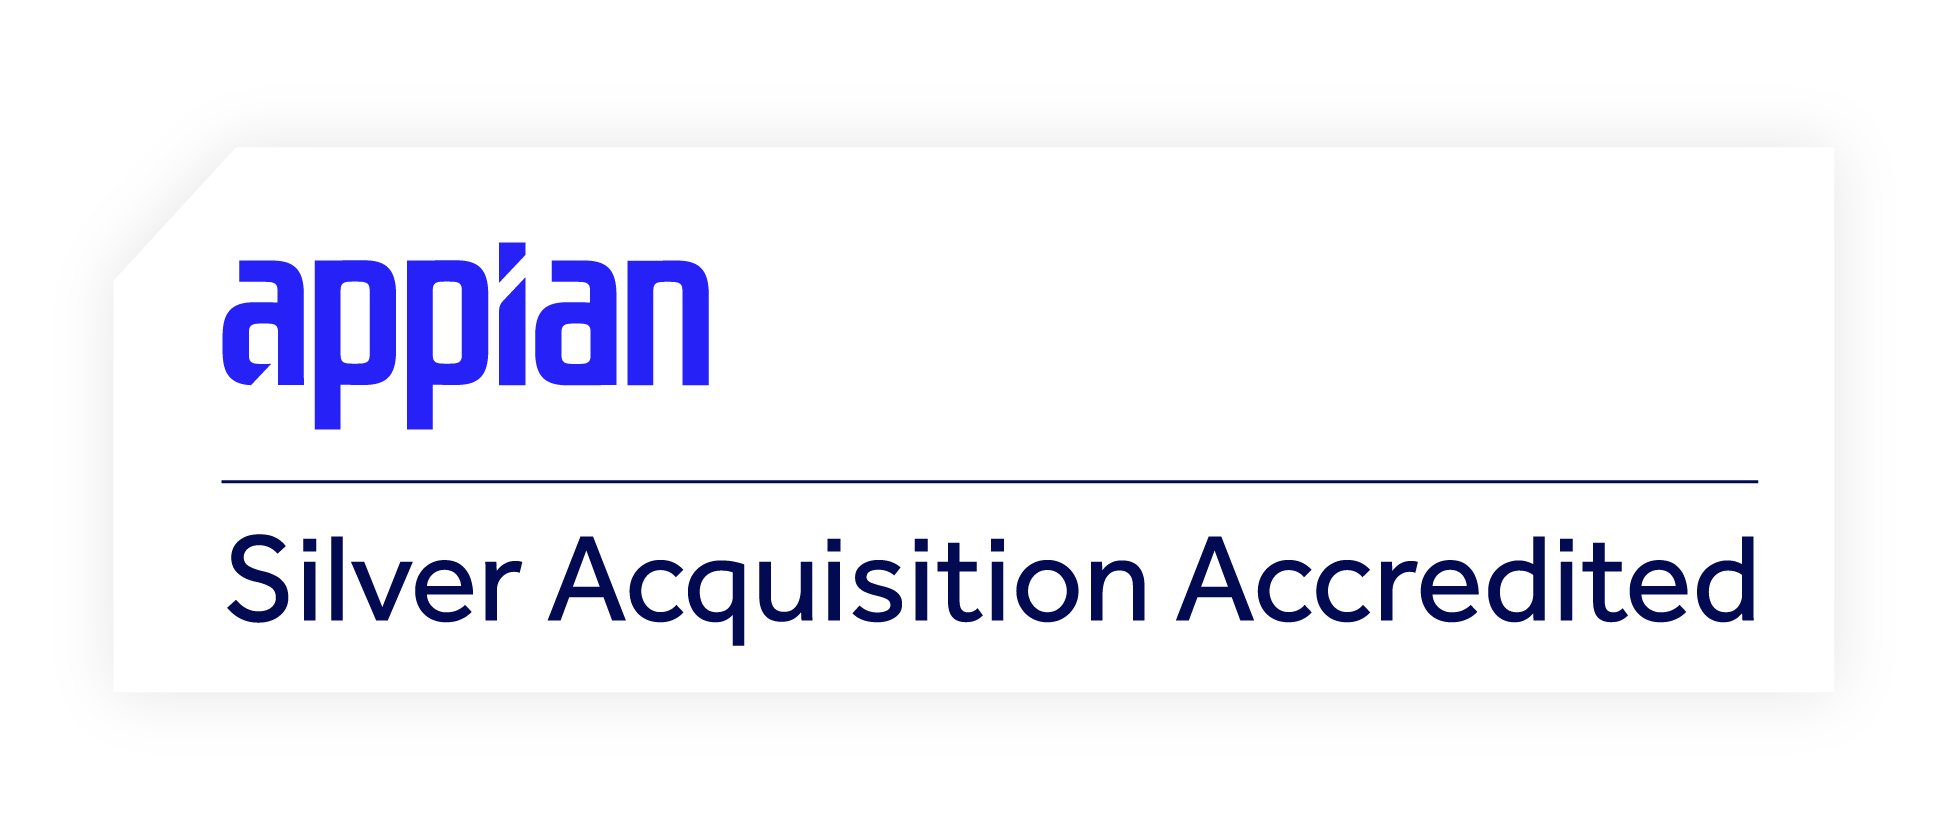 Silver Acquisition Accredited